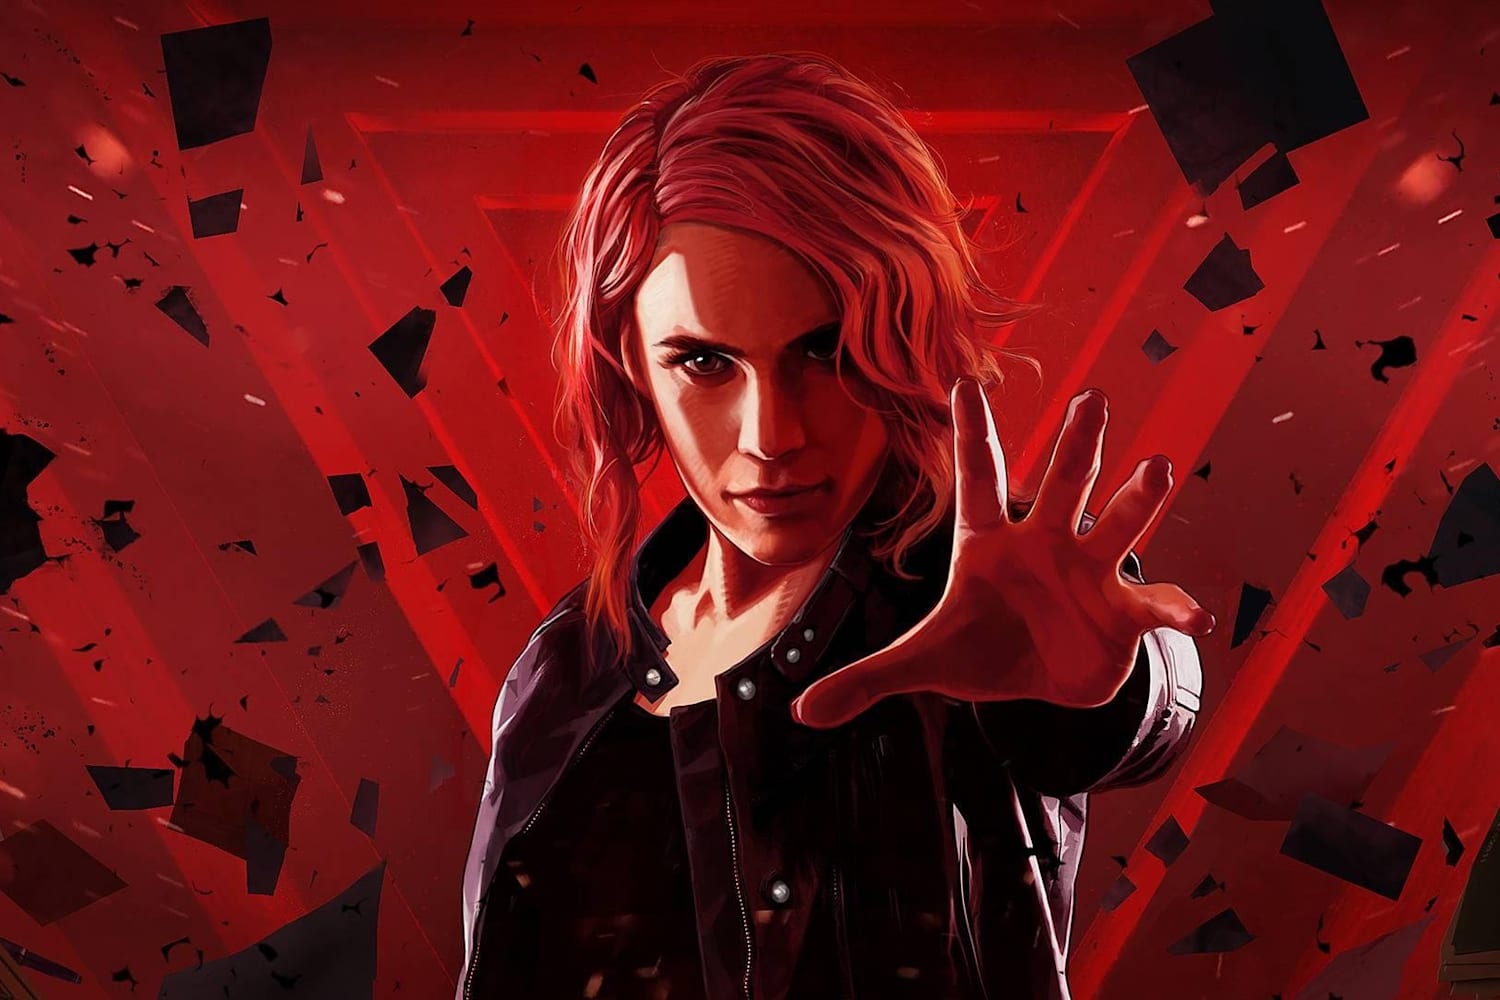 Remedy Reveals the First Fifteen Minutes of Control’s AWE Expansion